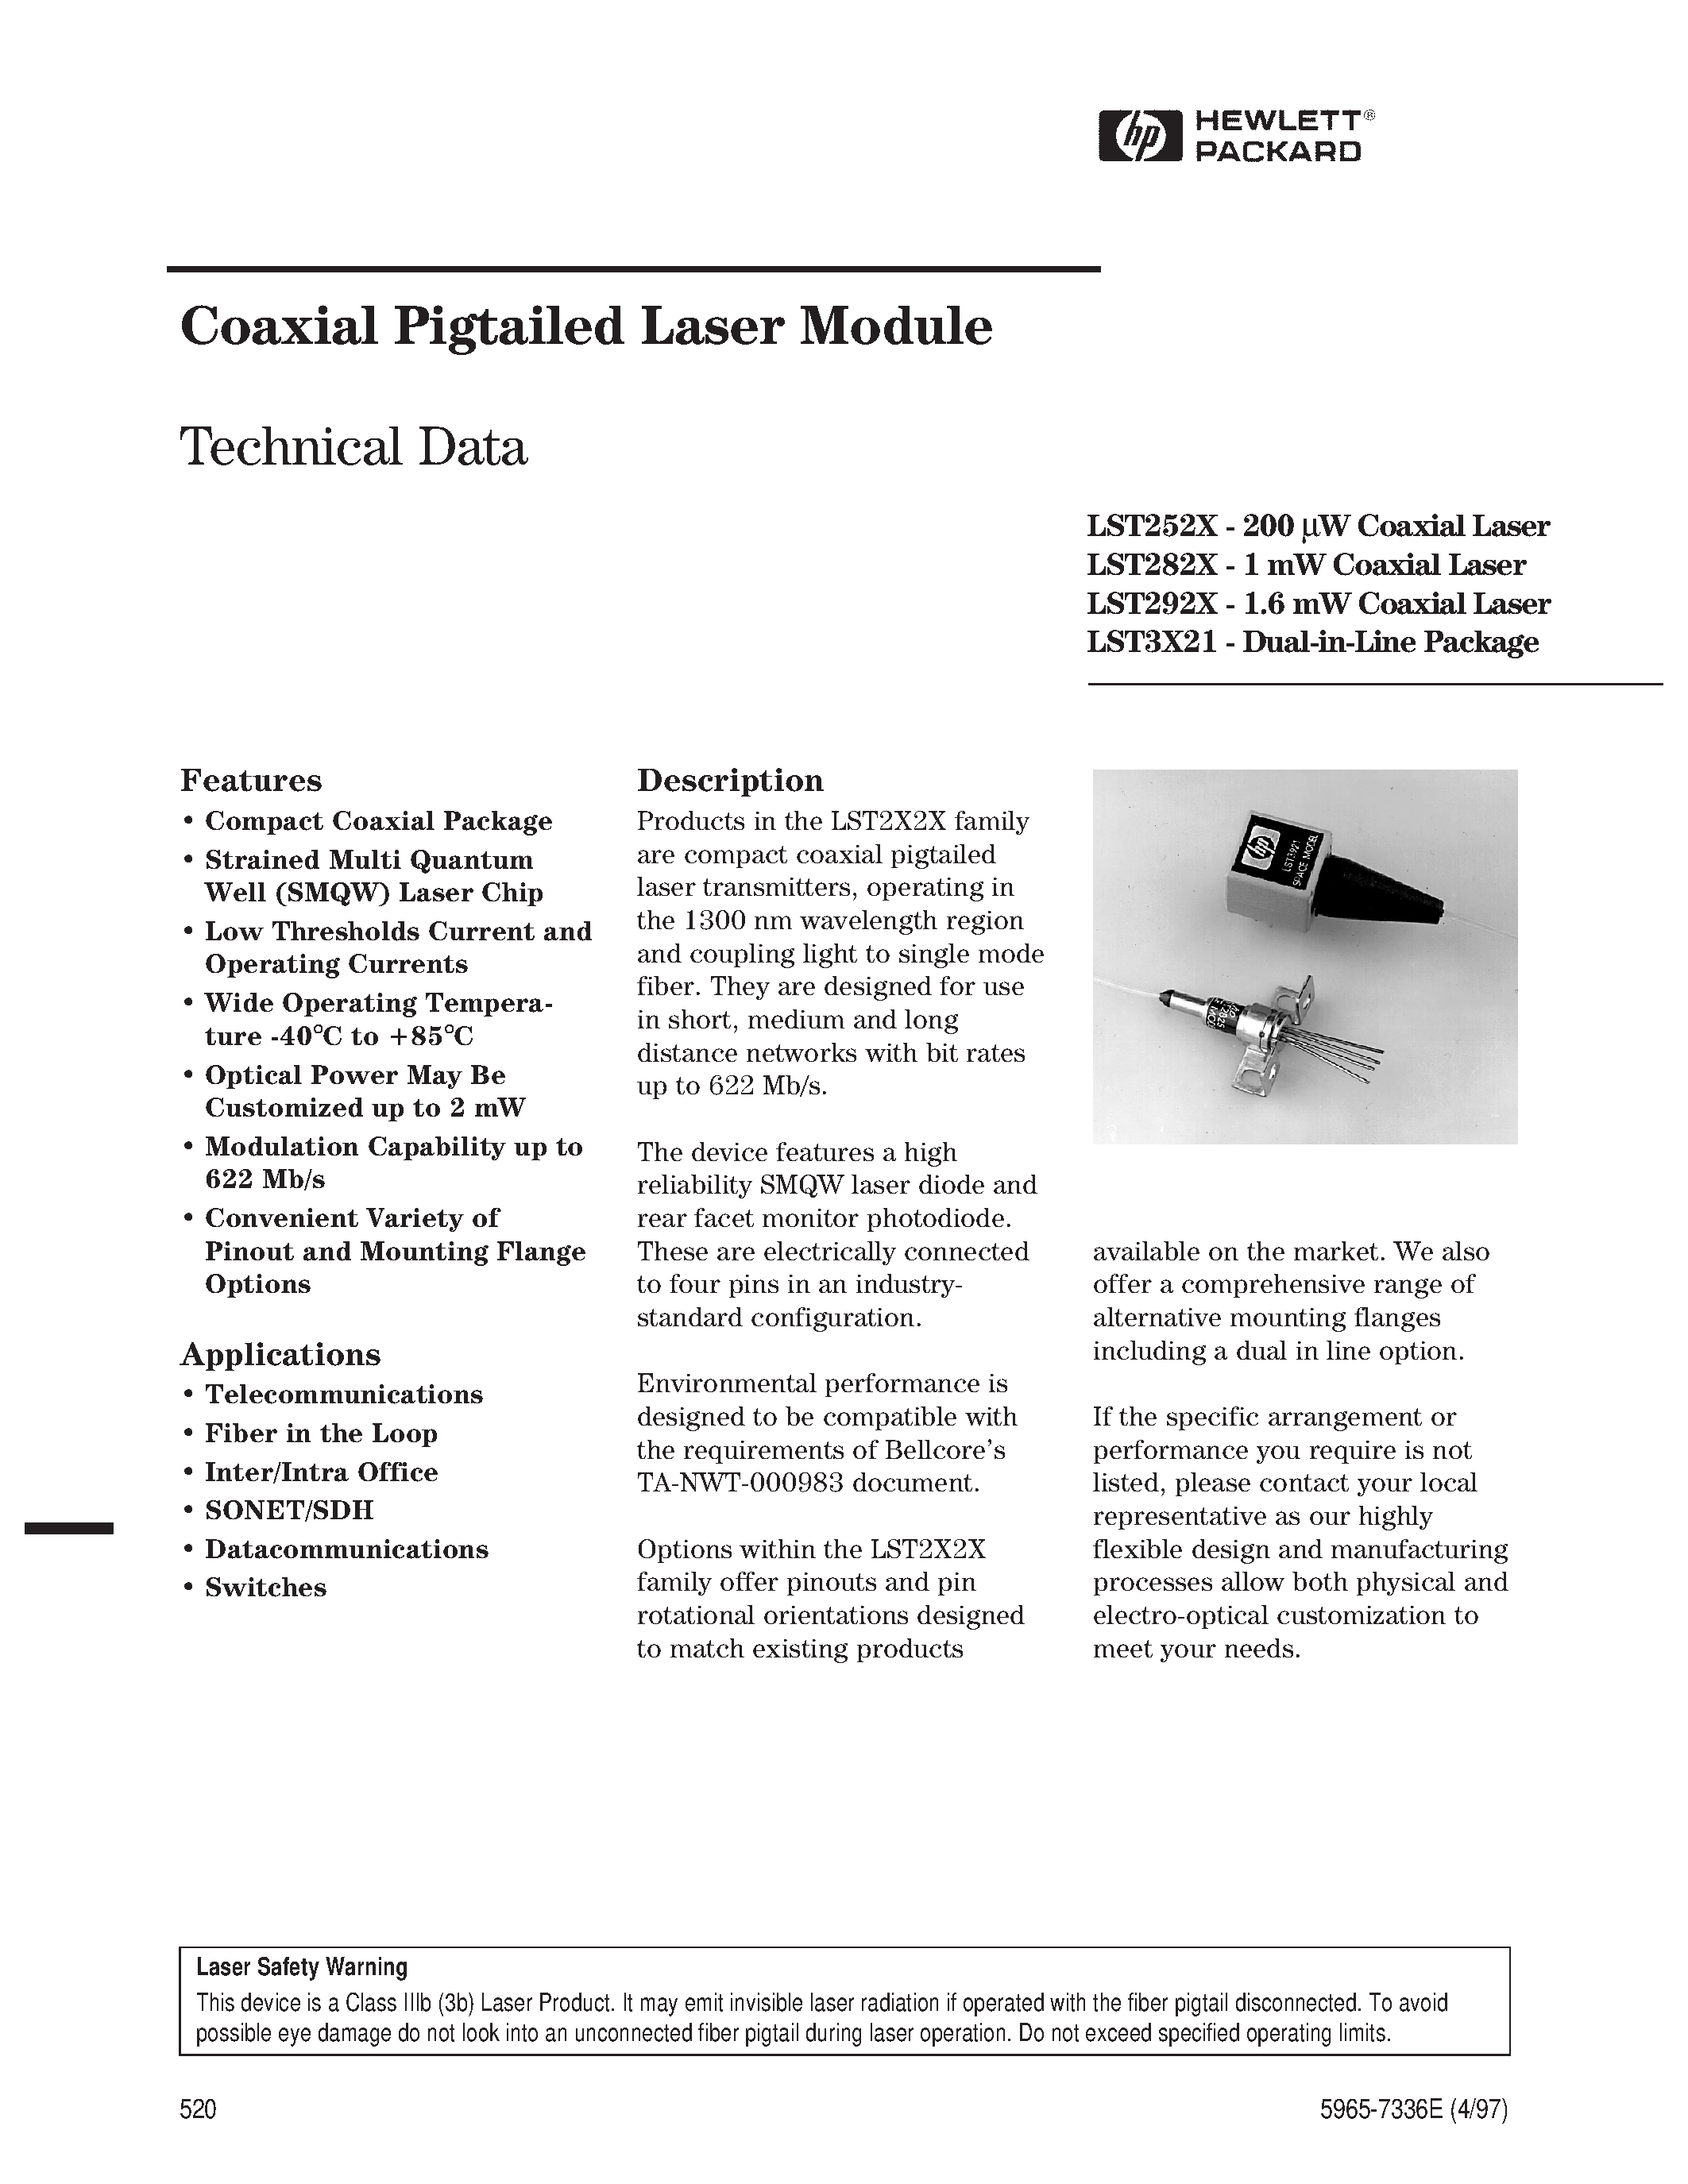 Даташит LST2925-S4-T-ST - Coaxial Pigtailed Laser Module страница 1